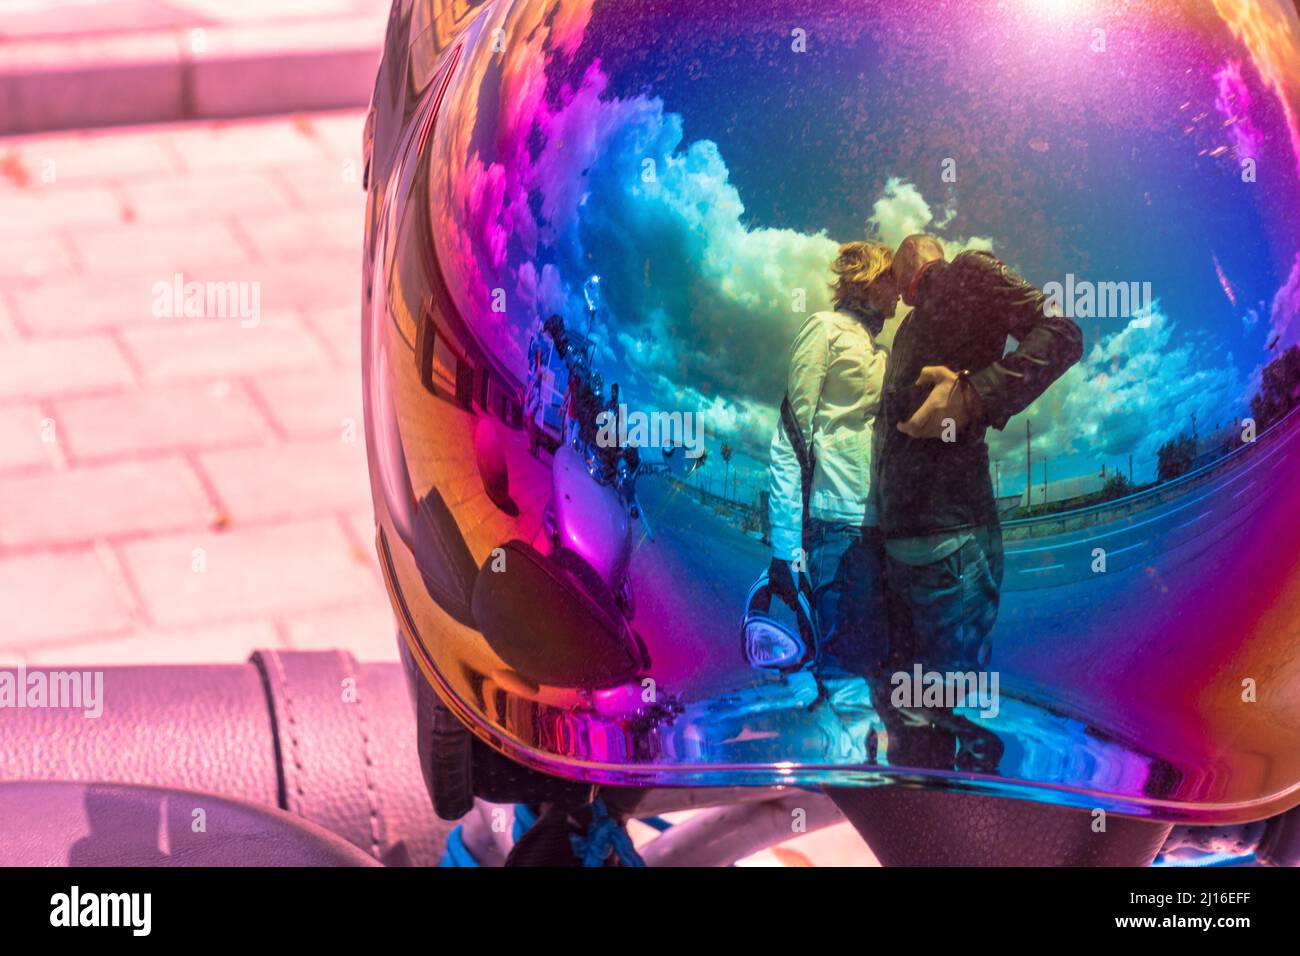 A man stands next to a woman in the reflection of a bubble visor helmet. Mirror visor Stock Photo